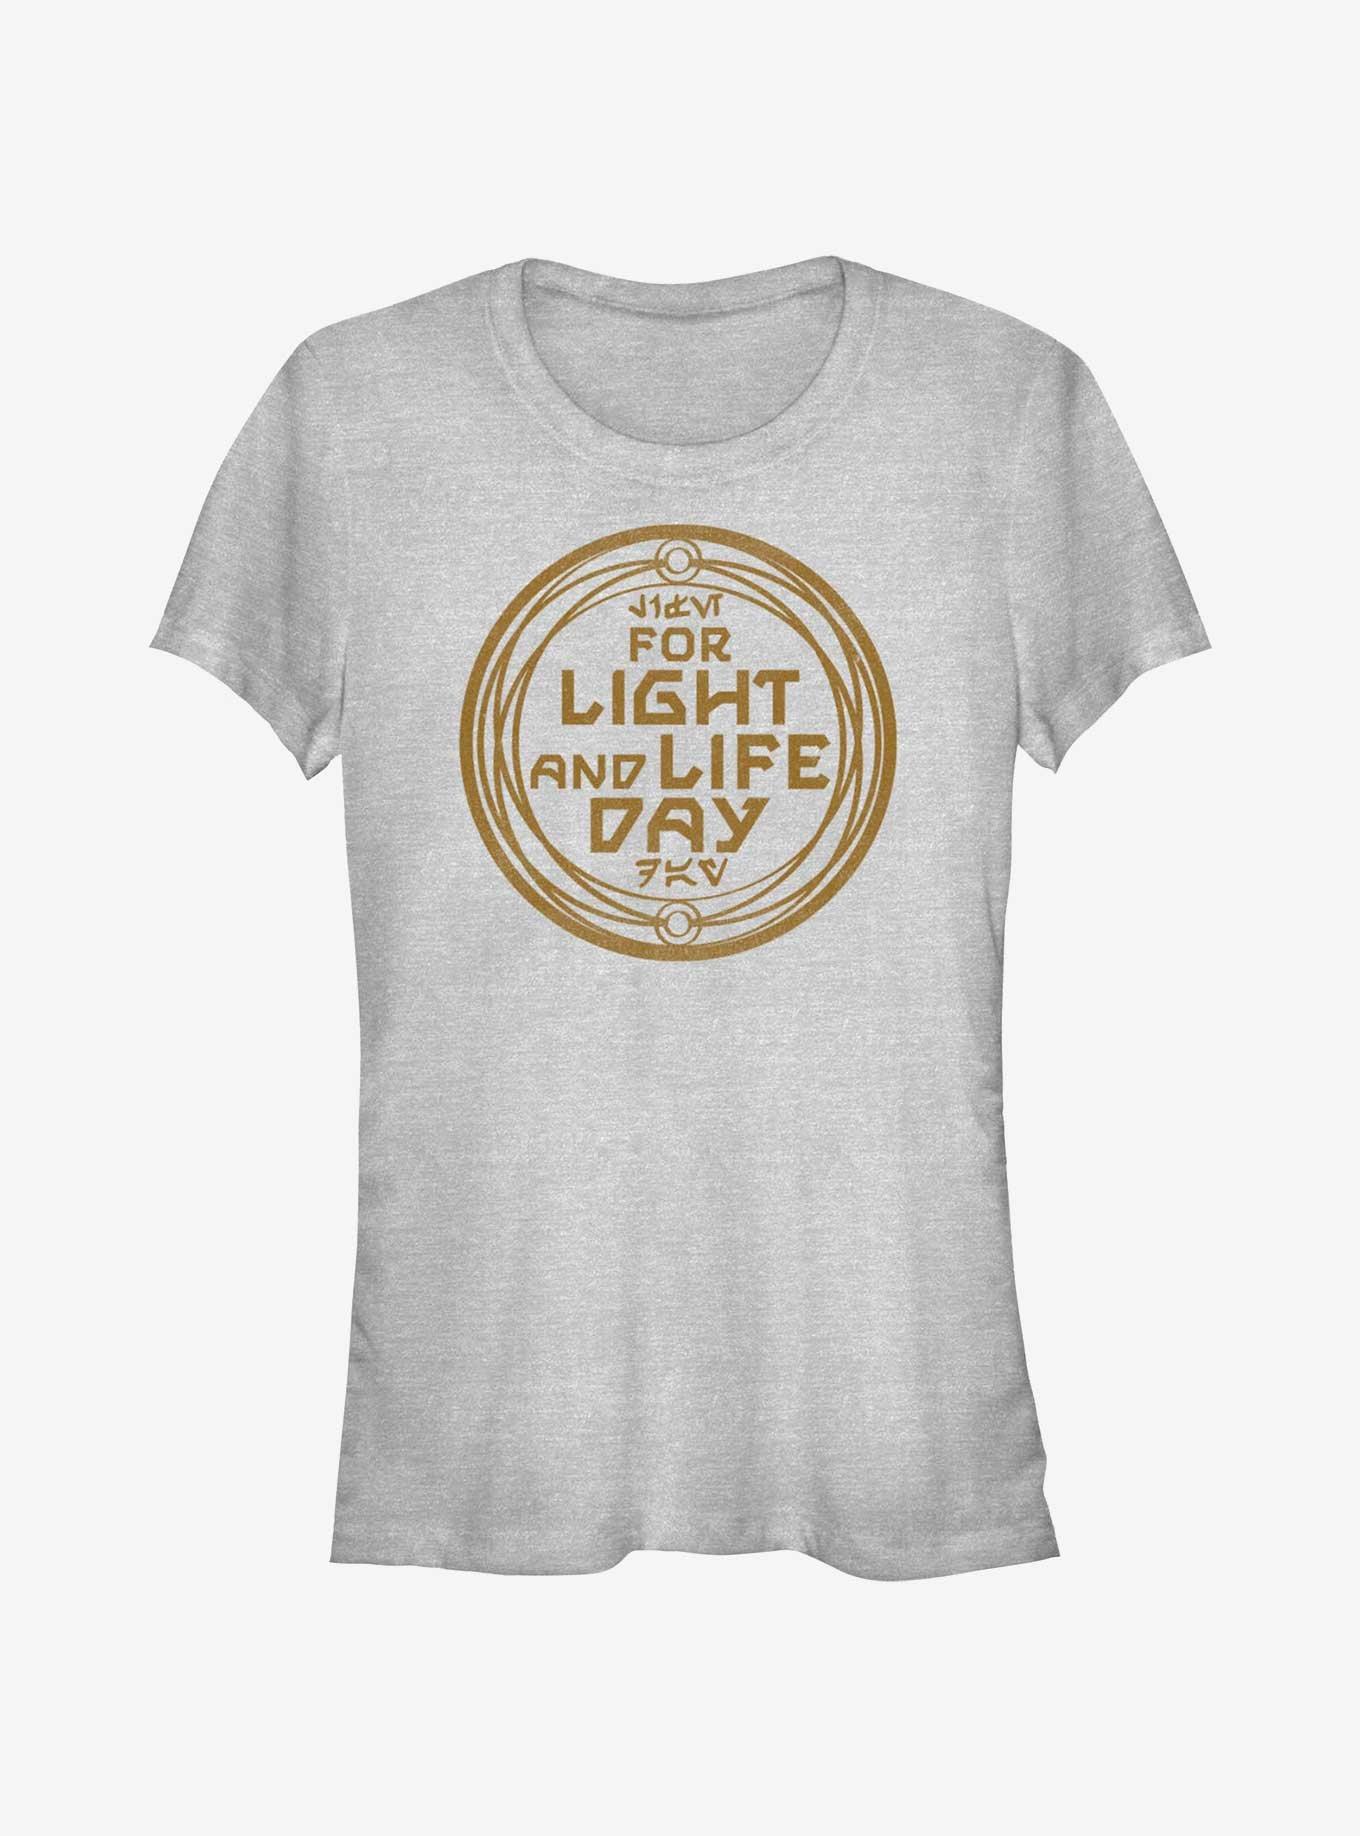 Star Wars For Light and Life Day Badge Girls T-Shirt